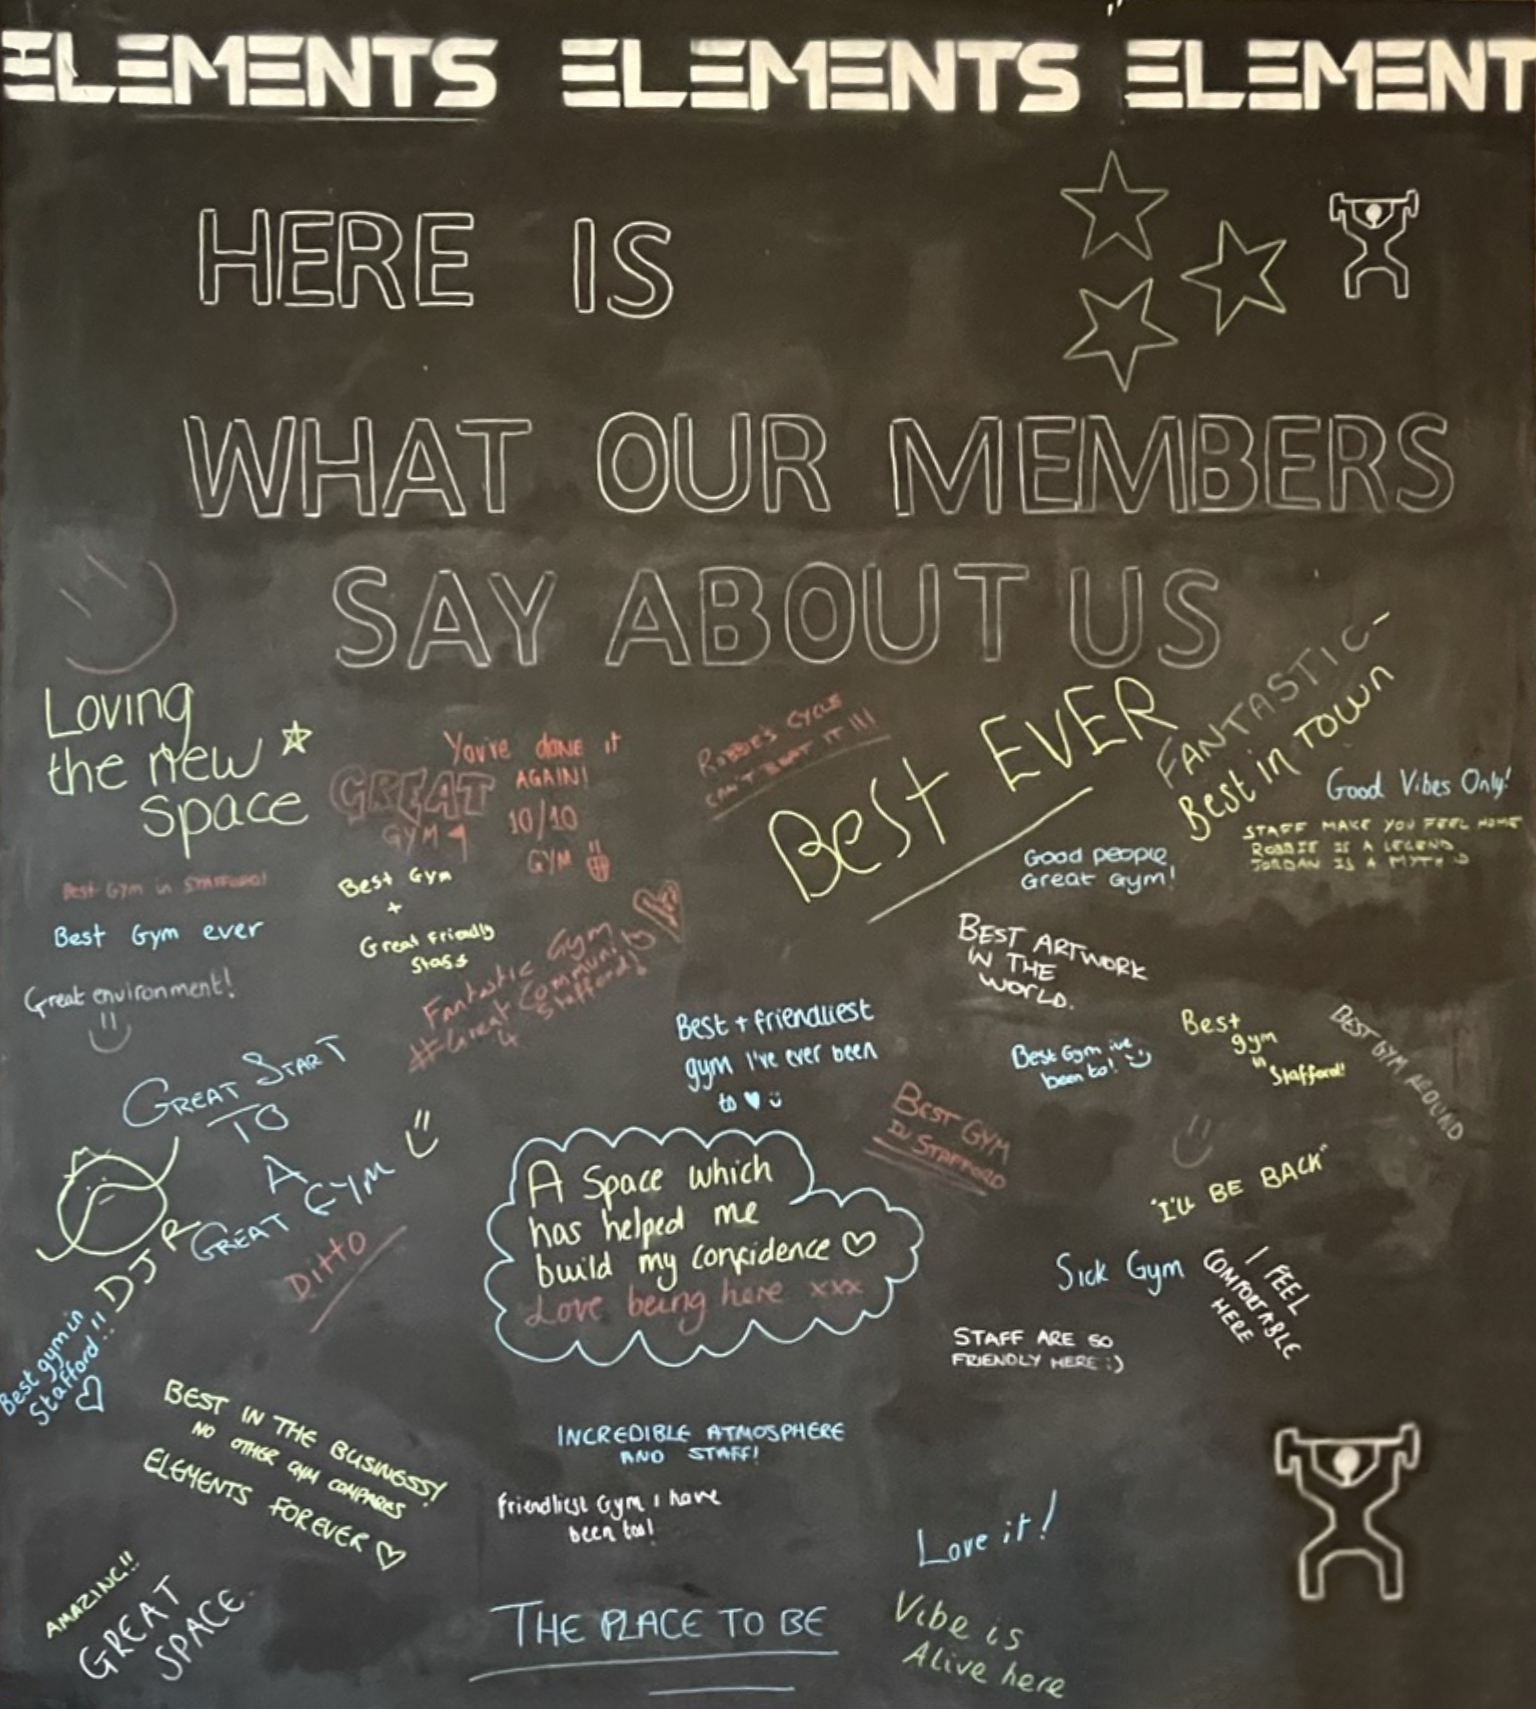 A chalkboard showing a whole host of different reviews from members of the gym. Some of which can be found on this page.